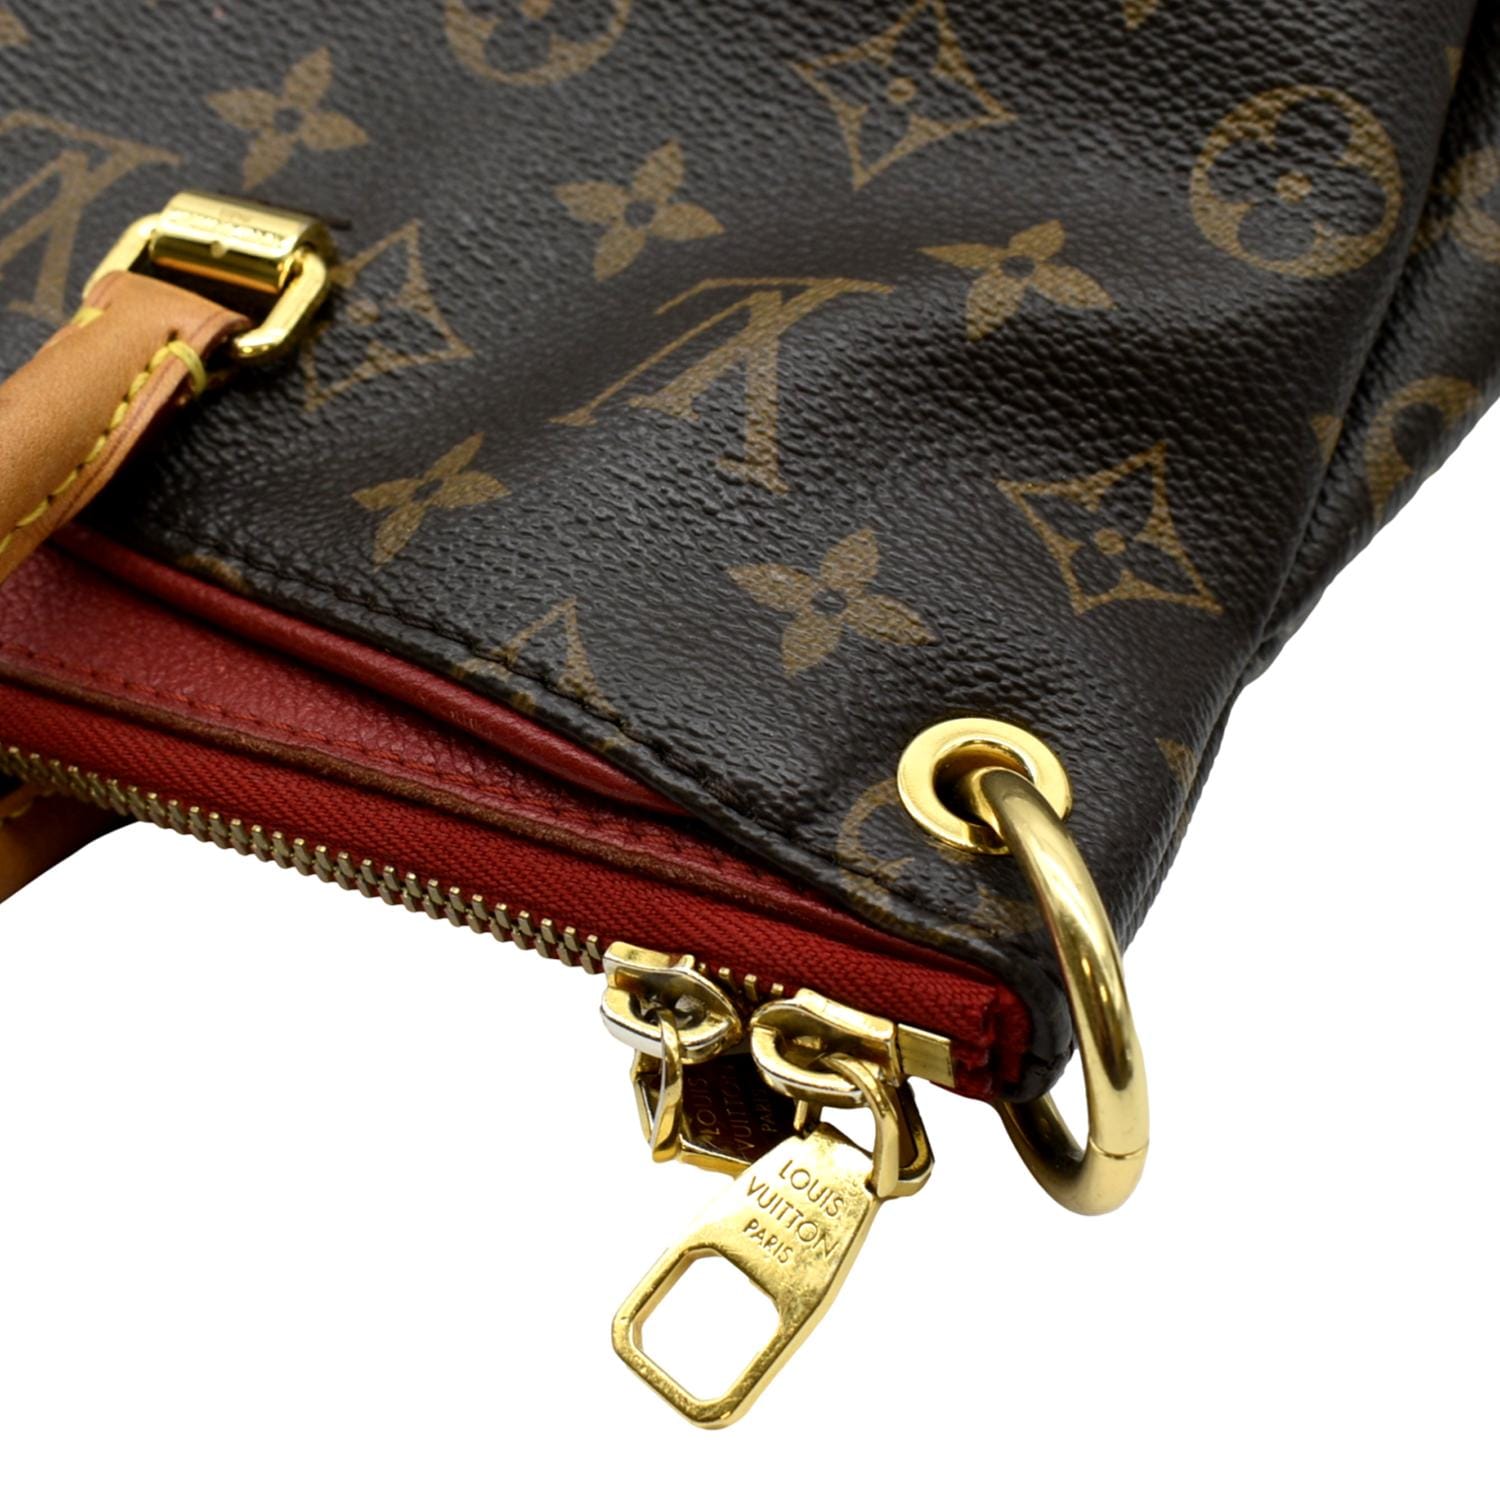 LV Pallas MM Brown Monogram Canvas with Leather and Gold Hardware